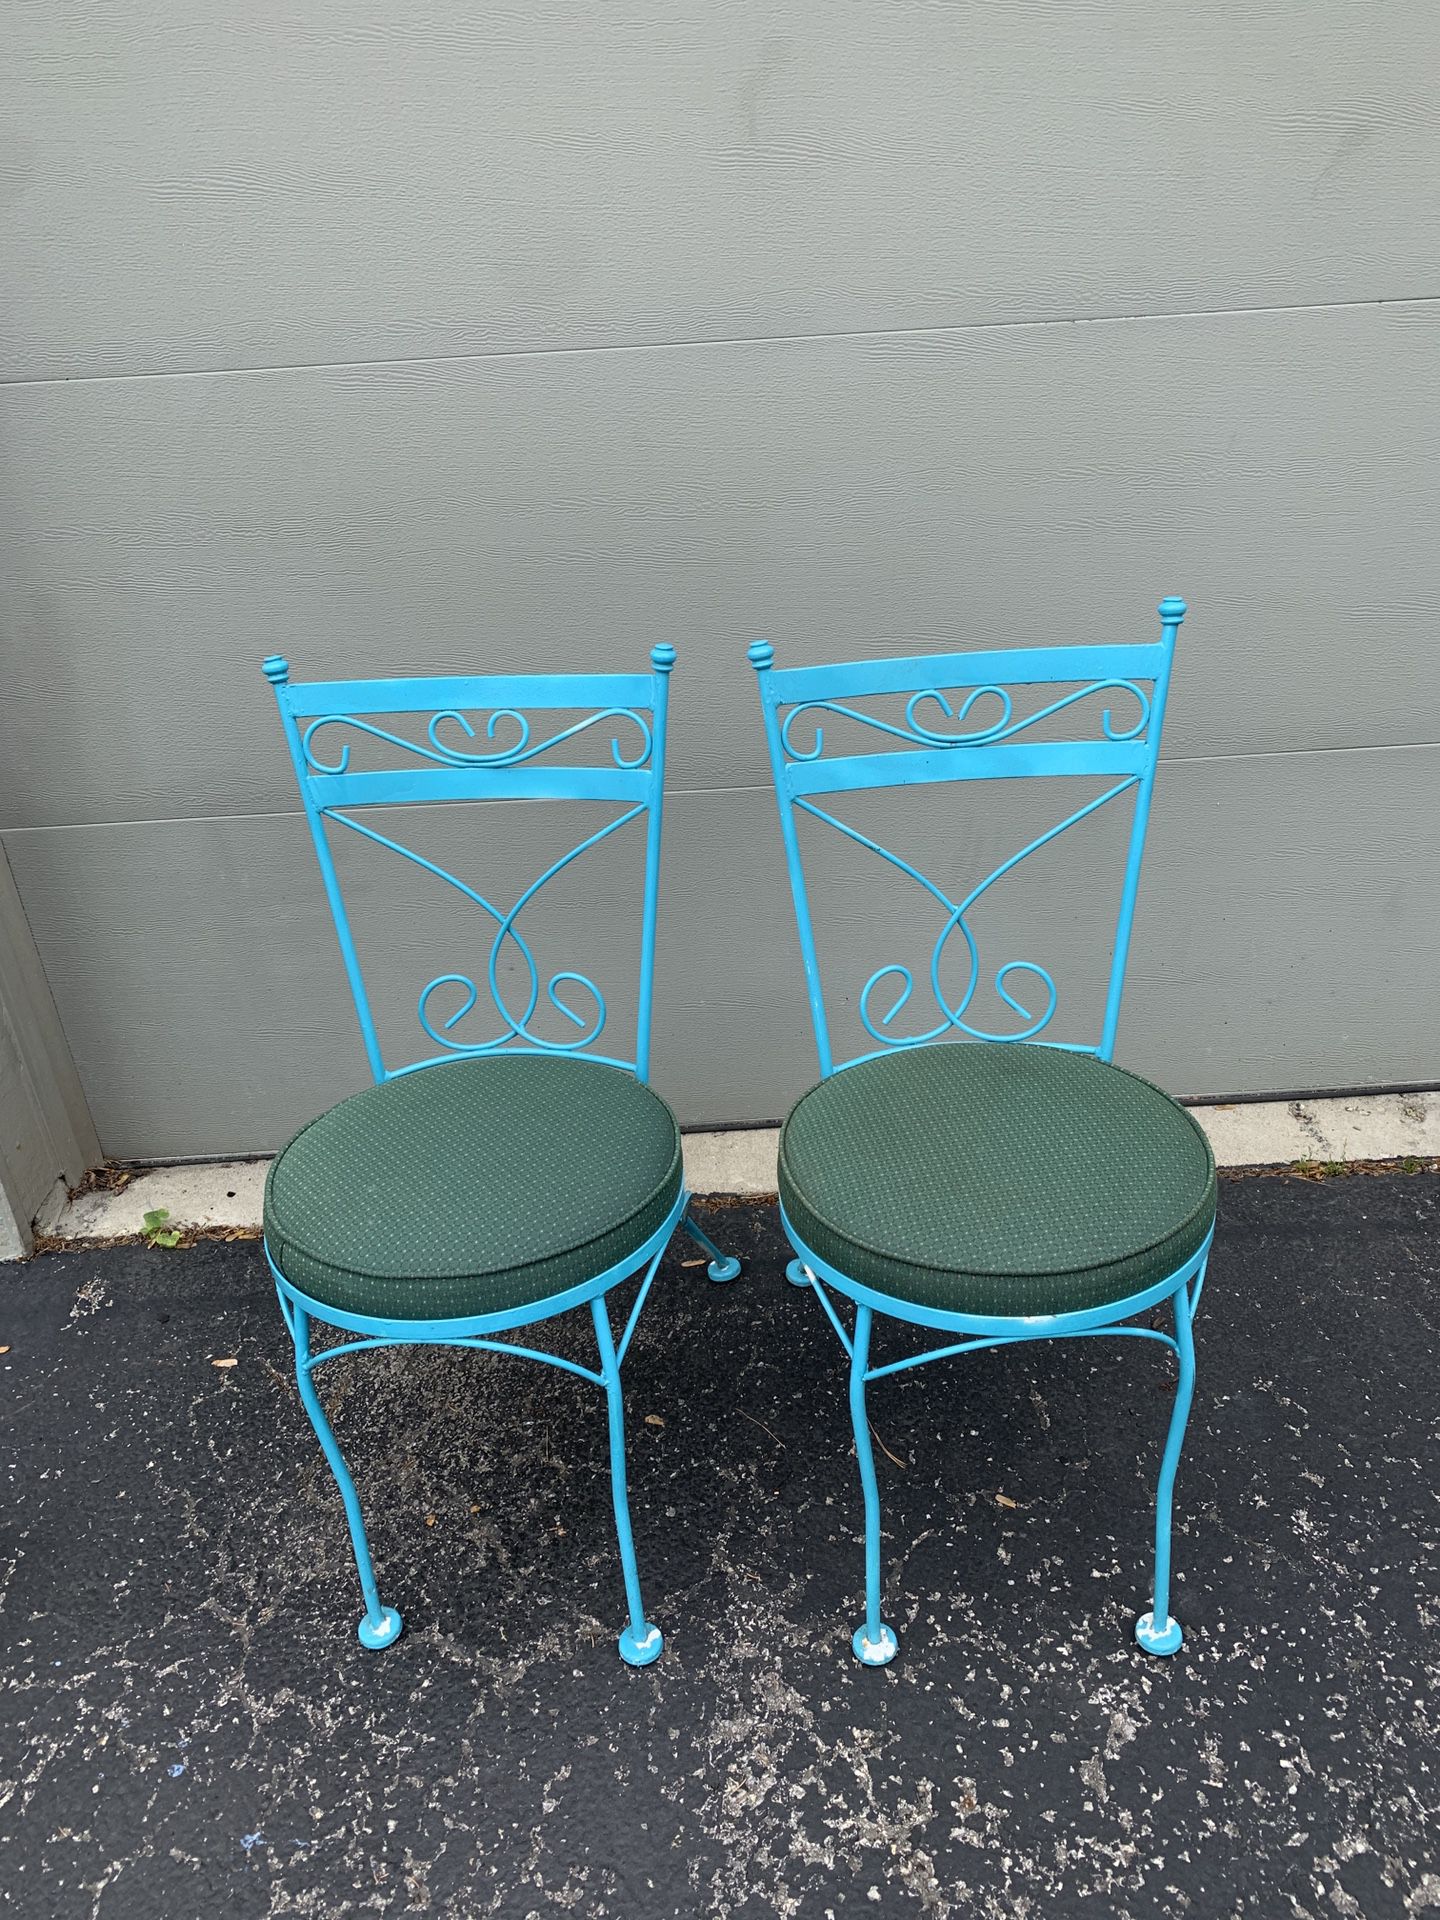 Vintage blue table and chair set with green cushions and 2 chairs.